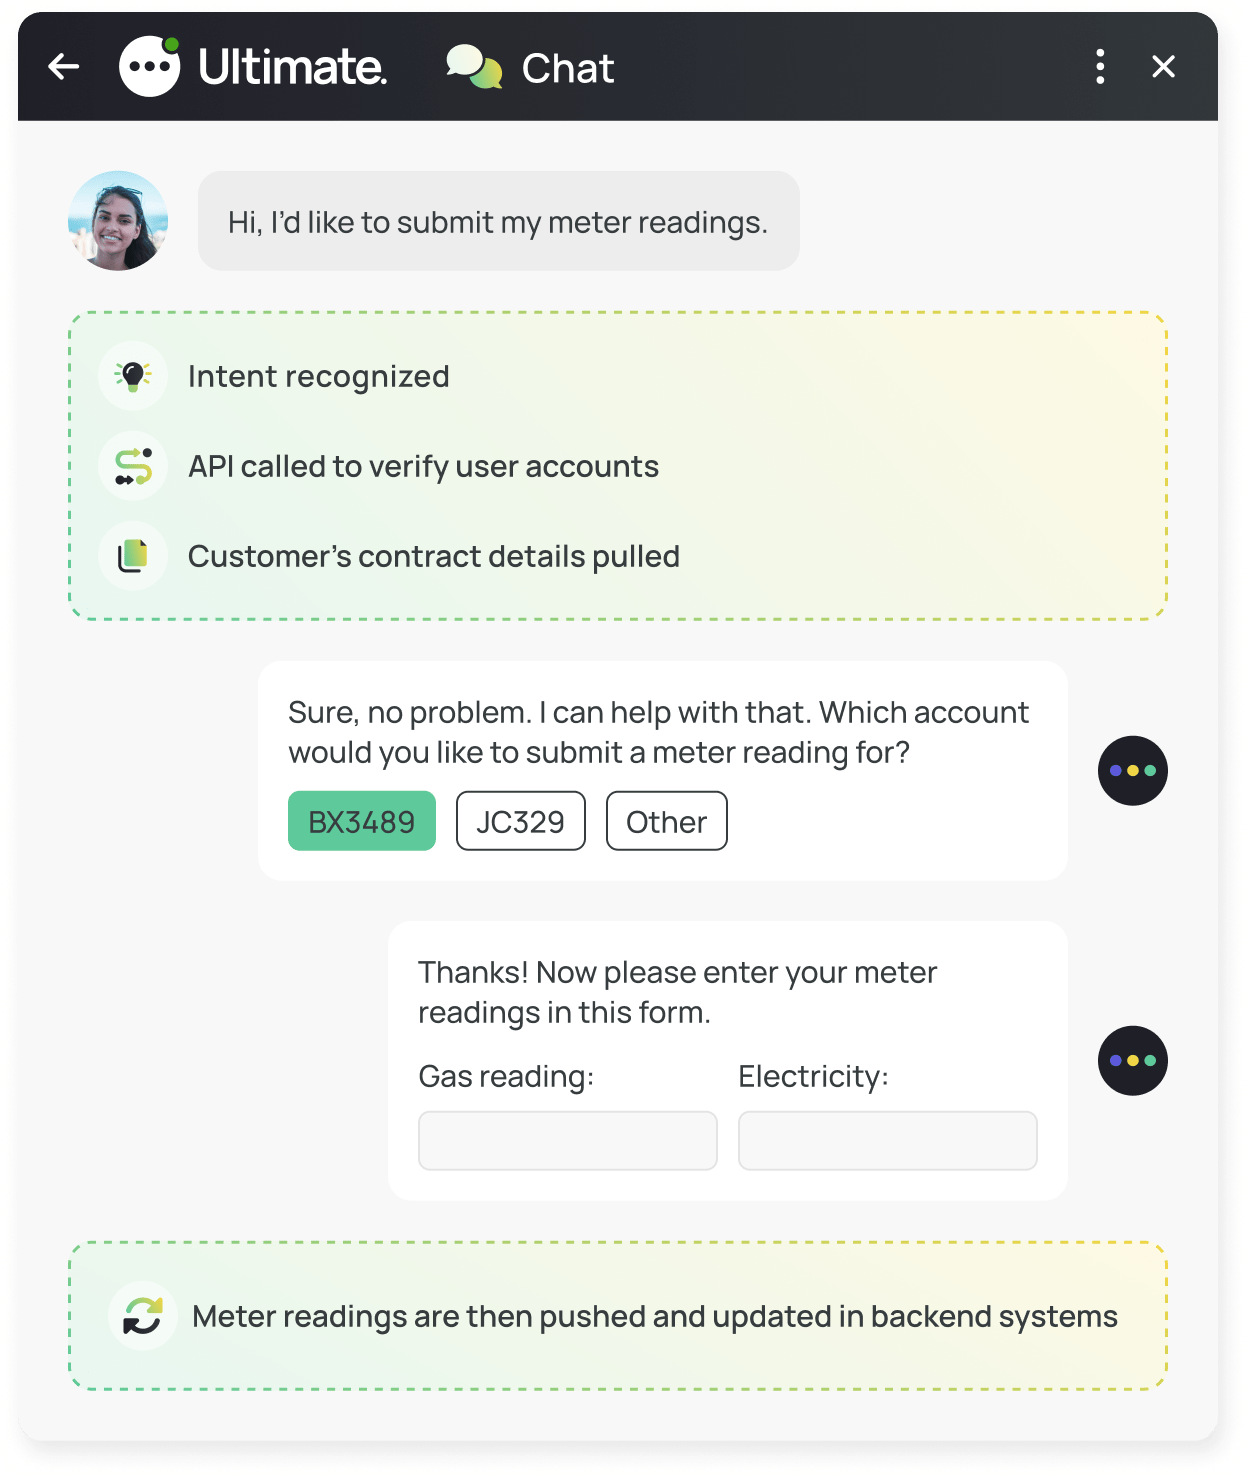 A customer is able to submit her meter readings to her energy provider because an API is able to verify her account details and then access the account. Ultimate's chatbot then confirms that the meter readings have been updated in the backend system.